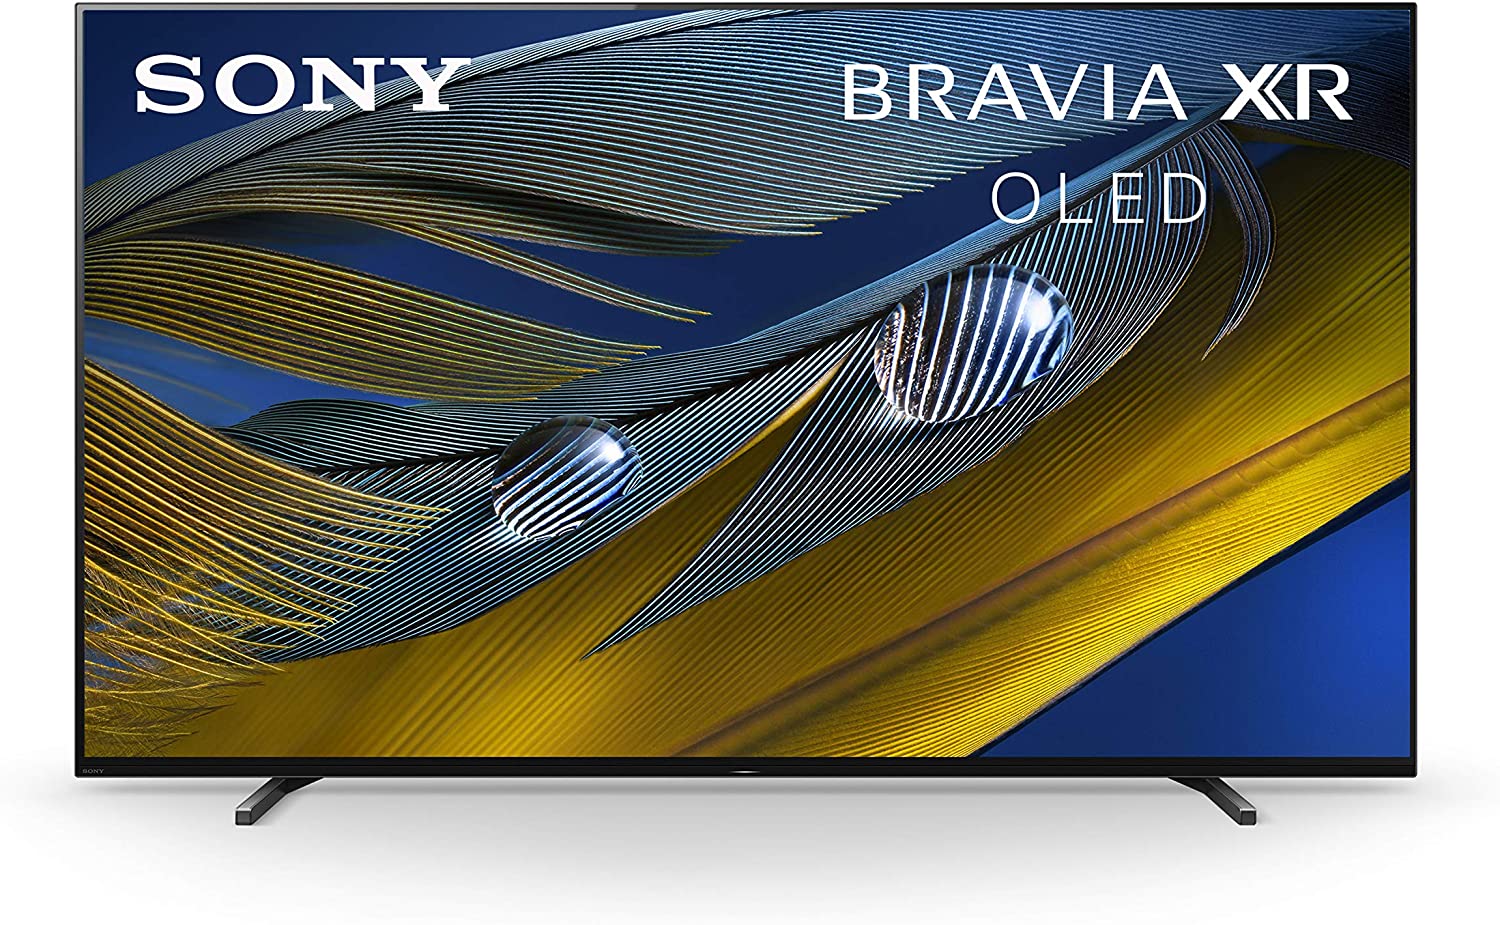 Sony-A80J-65-Inch-TV:-BRAVIA-XR-OLED-4K-Ultra-HD-Smart-Google-TV-with-Dolby-Vision-HDR-and-Alexa-Compatibility-XR65A80J-2021-Model,-Black